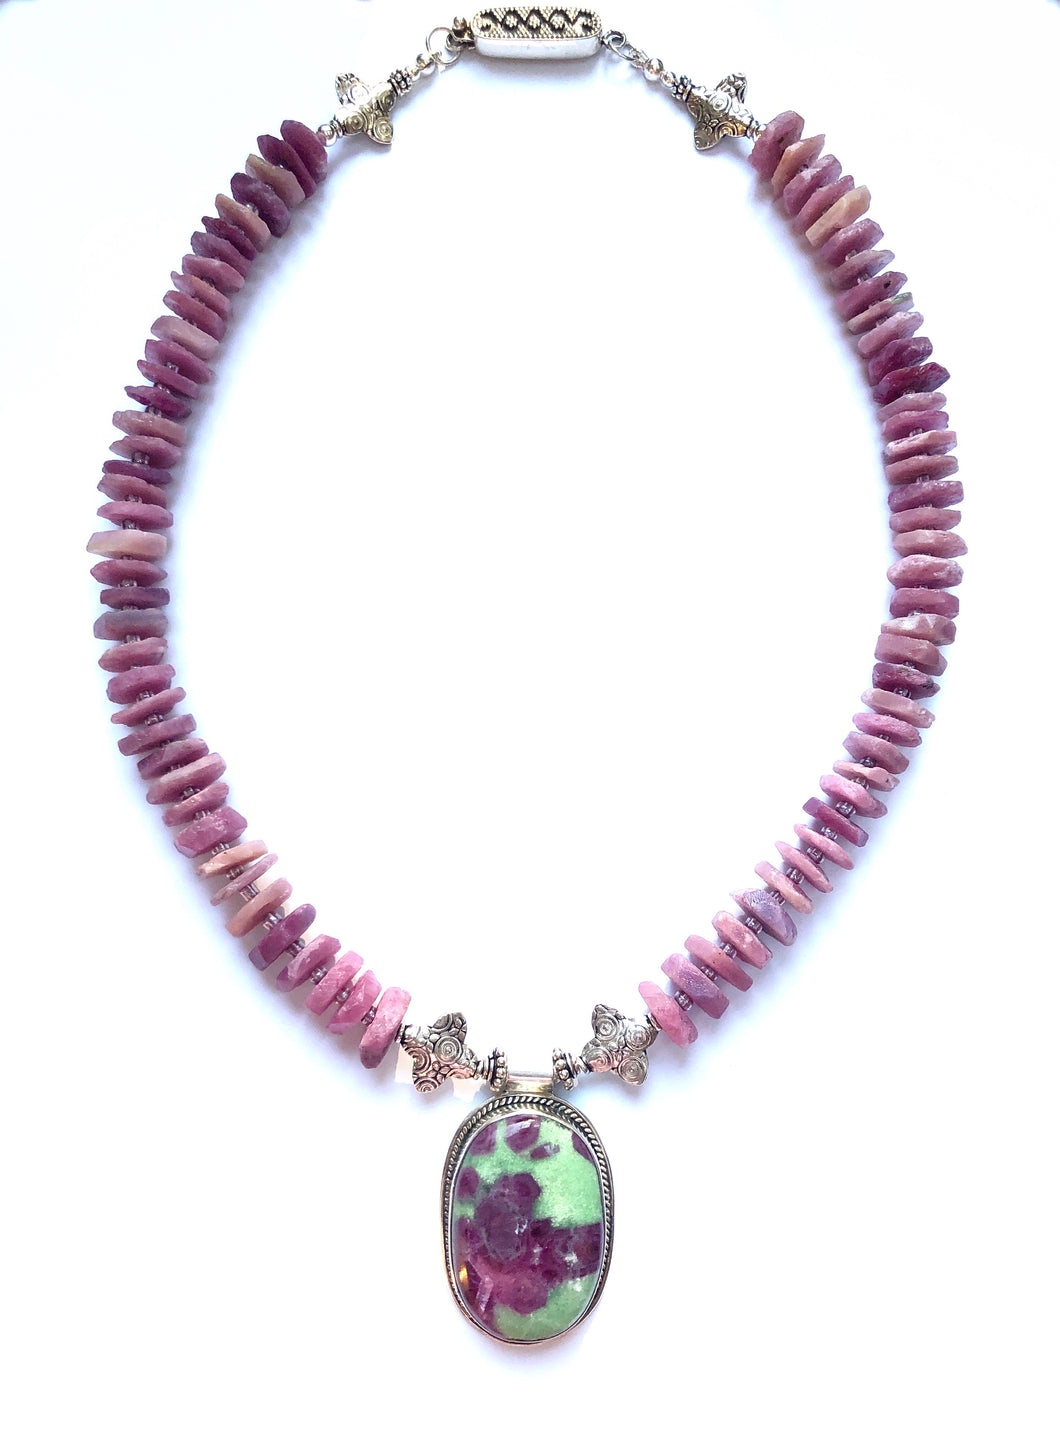 A Very Special Statement Piece with Ruby Zoisite!